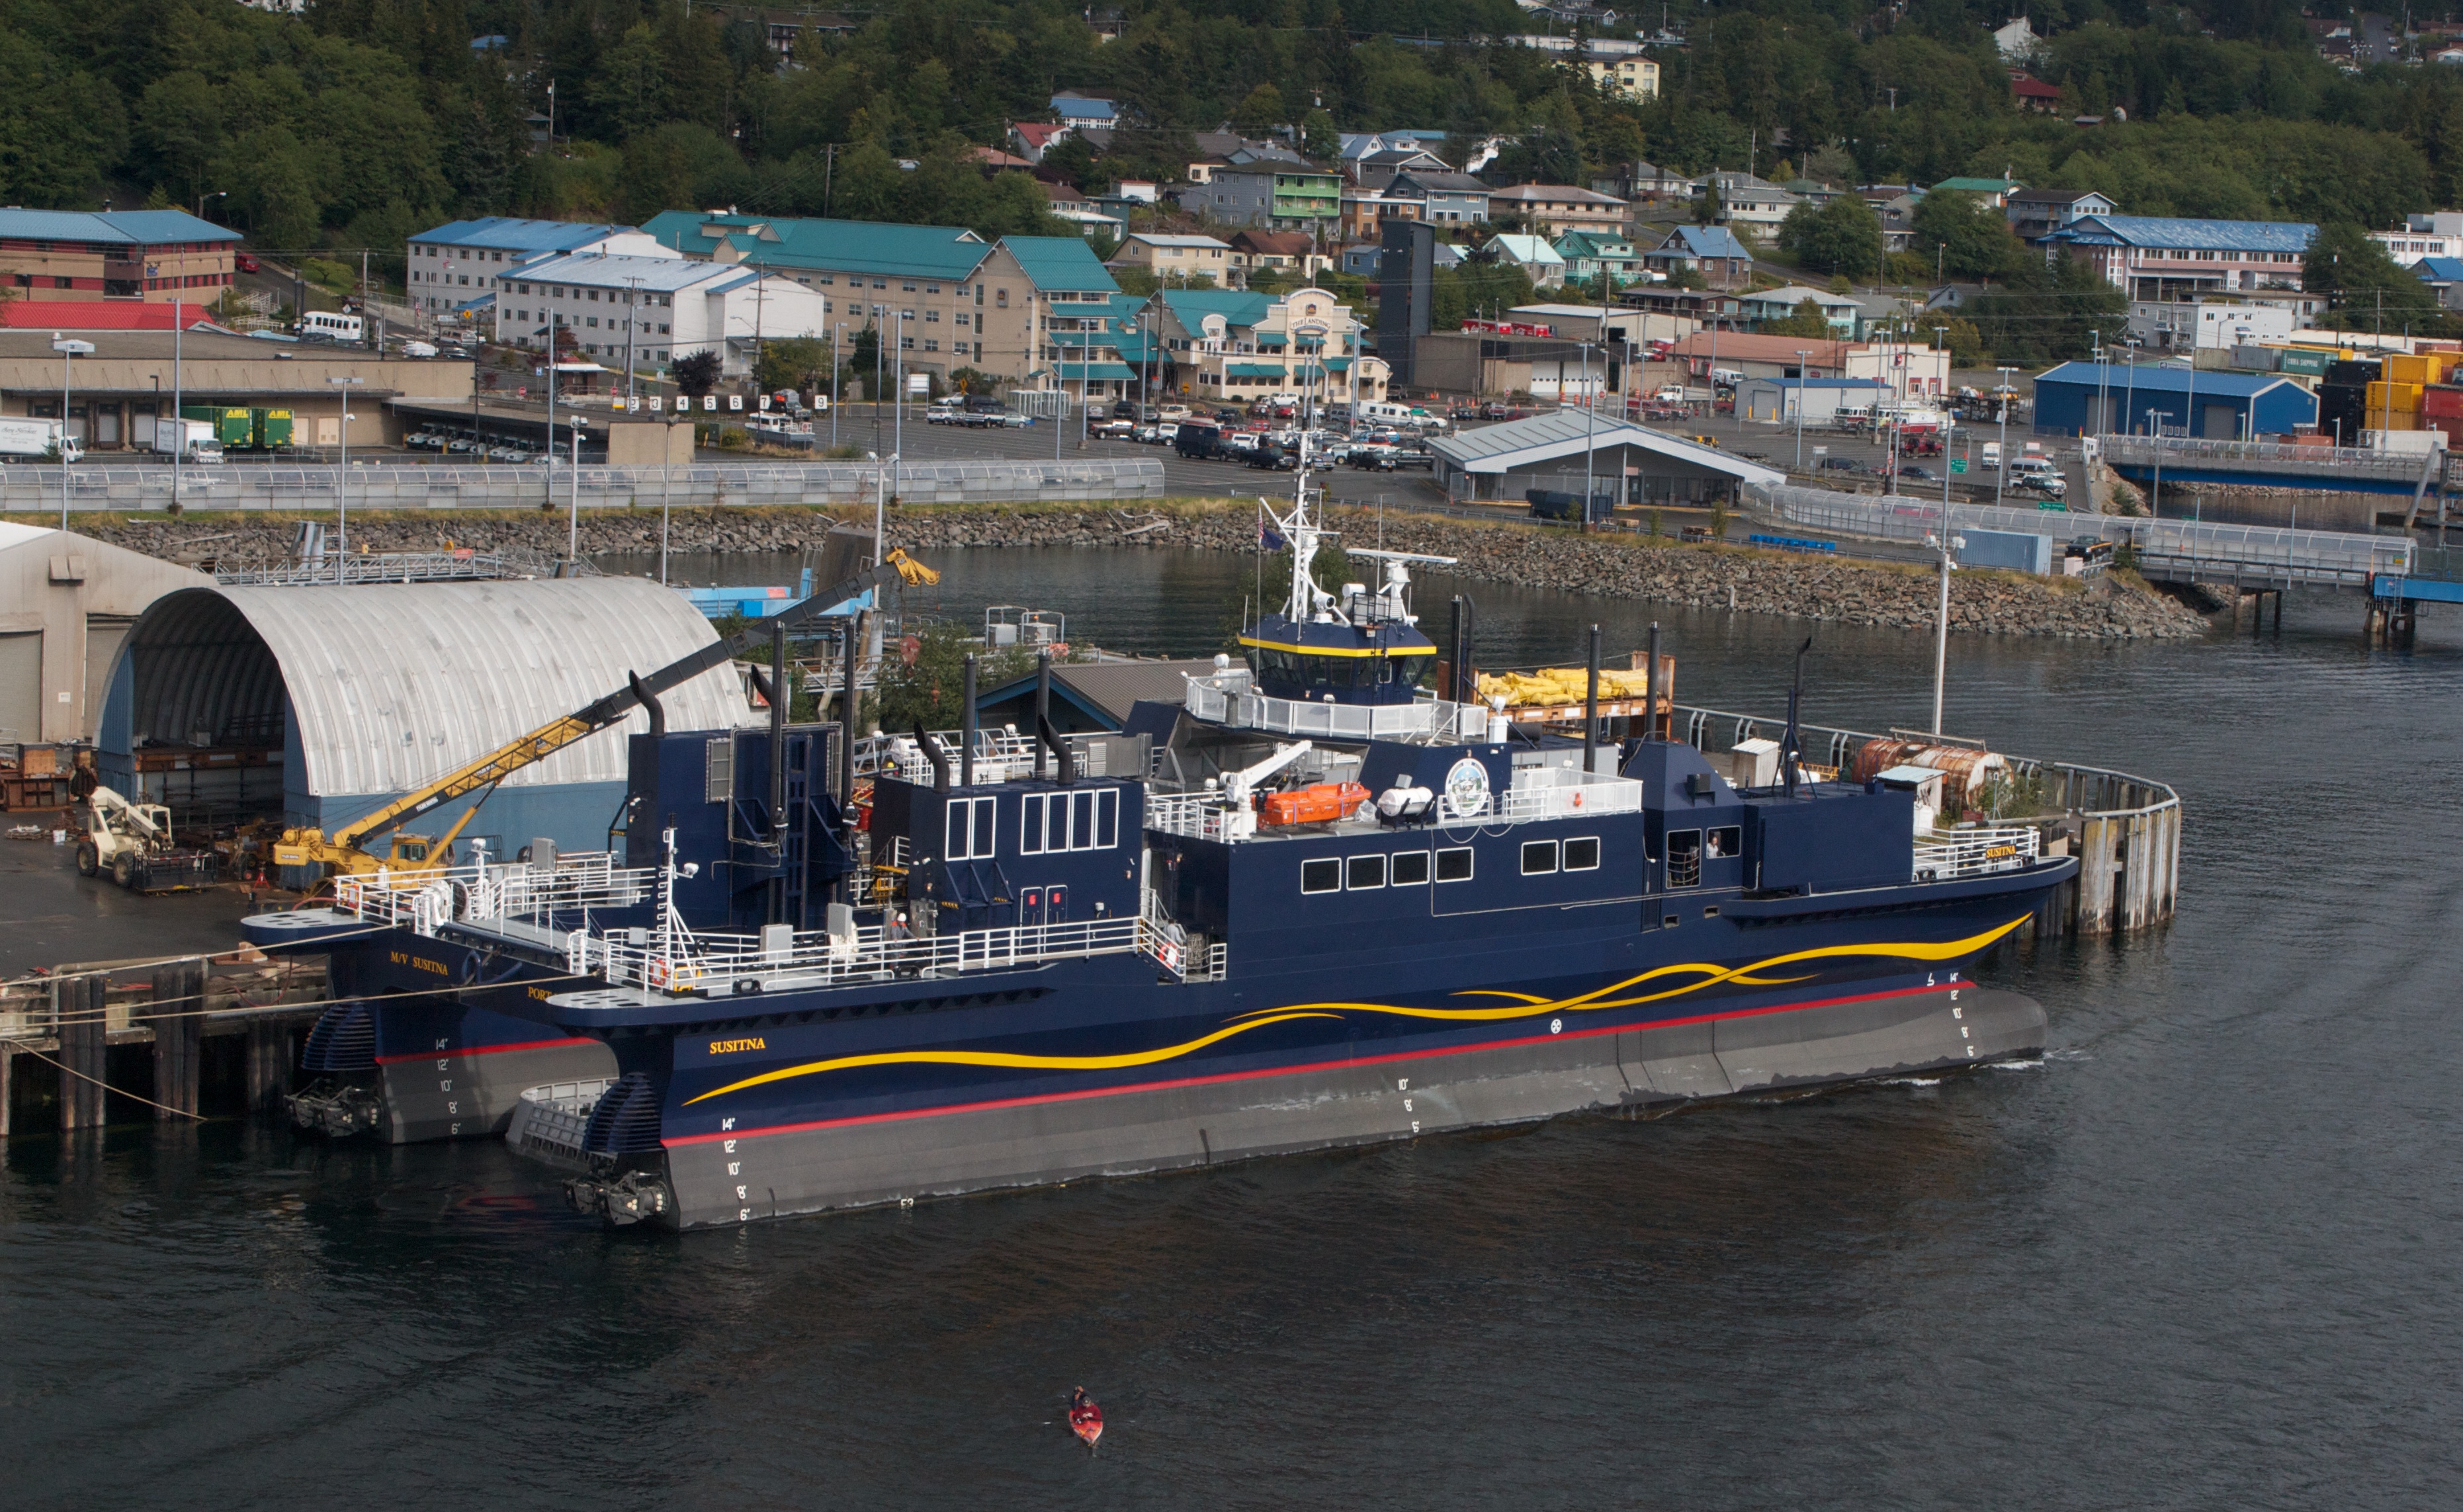 The ferry M/V Susitna being outfitted in Ketchikan for delivery to Anchorage in August 2010. It is a catamaran ice breaking ferry. (Creative Commons photo by Jay Galvin)